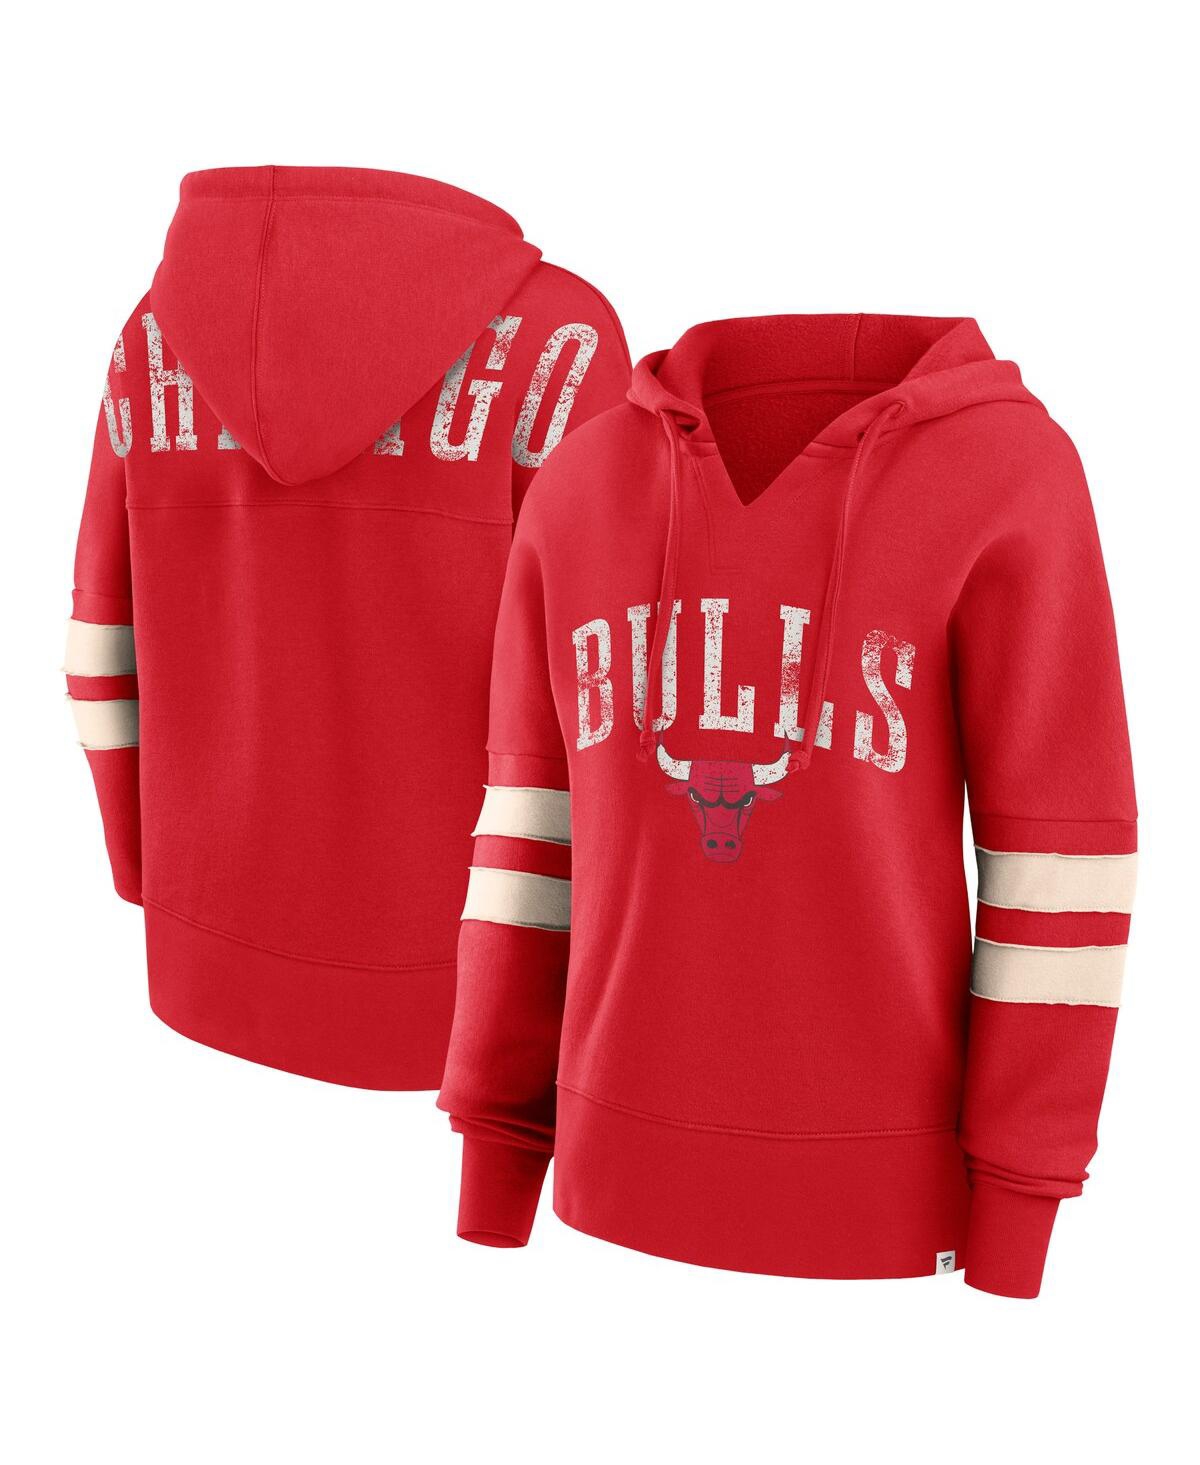 Shop Fanatics Women's  Red Distressed Chicago Bulls Bold Move Dolman V-neck Pullover Hoodie